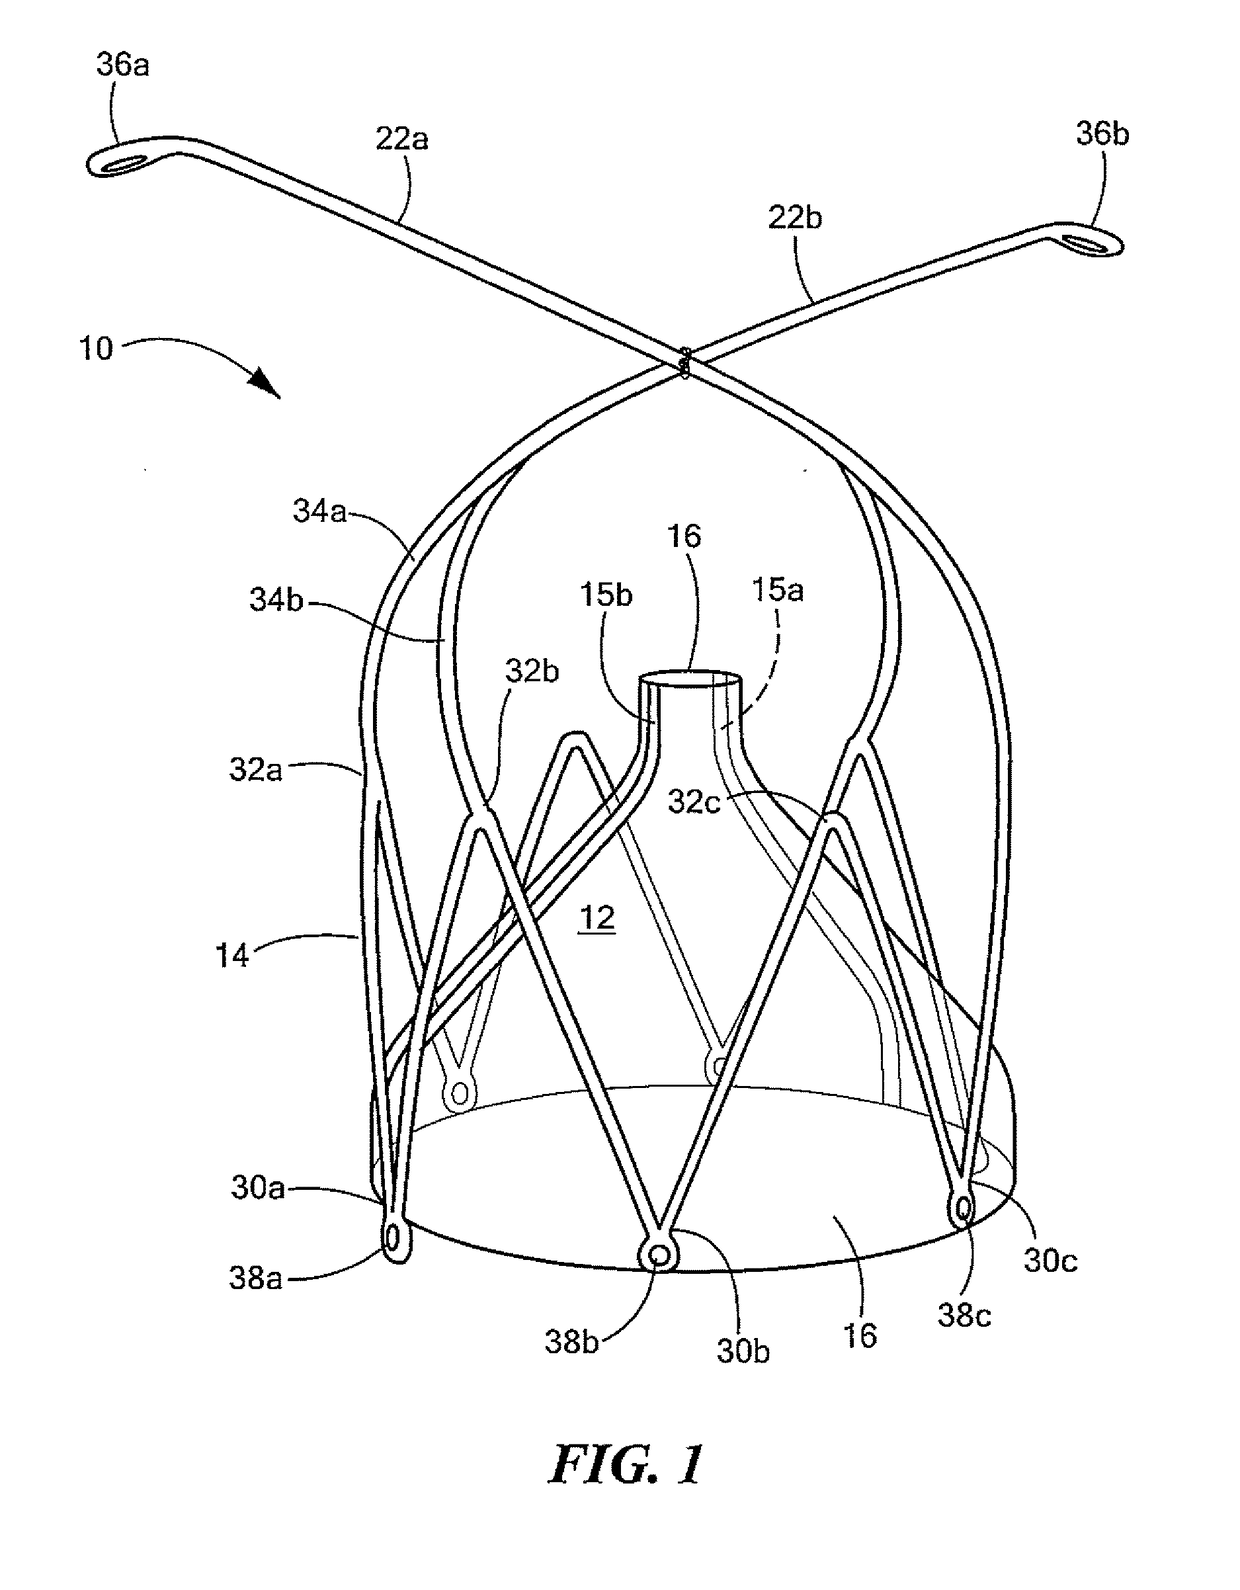 Transcatheter device and minimally invasive method for constricting and adjusting blood flow through a blood vessel